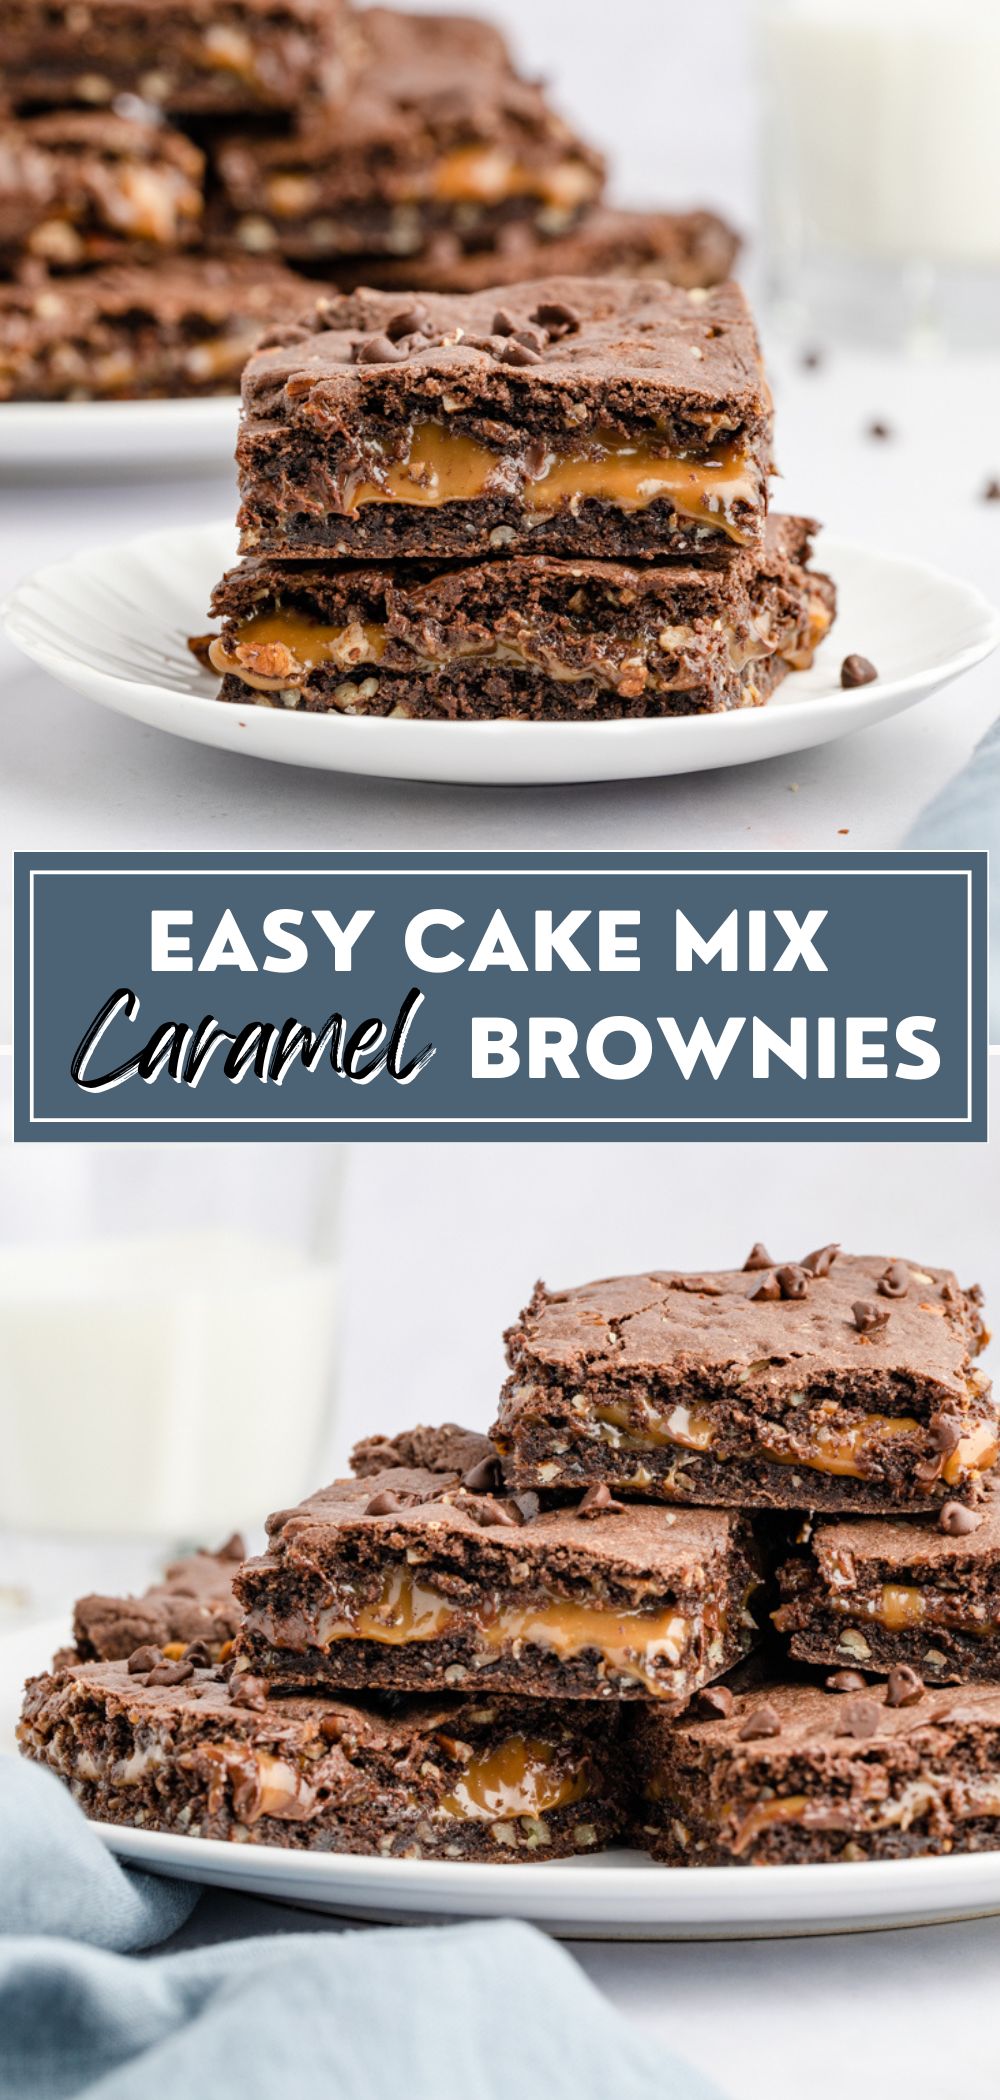 These ooey gooey caramel brownies made from chocolate boxed cake mix are so easy and simple to make. It's a dessert that is sure to wow your guests. They are filled with caramel squares, chocolate chips, and pecans. So fudgy and delicious. You can't stop at just one! via @skinnydesserts